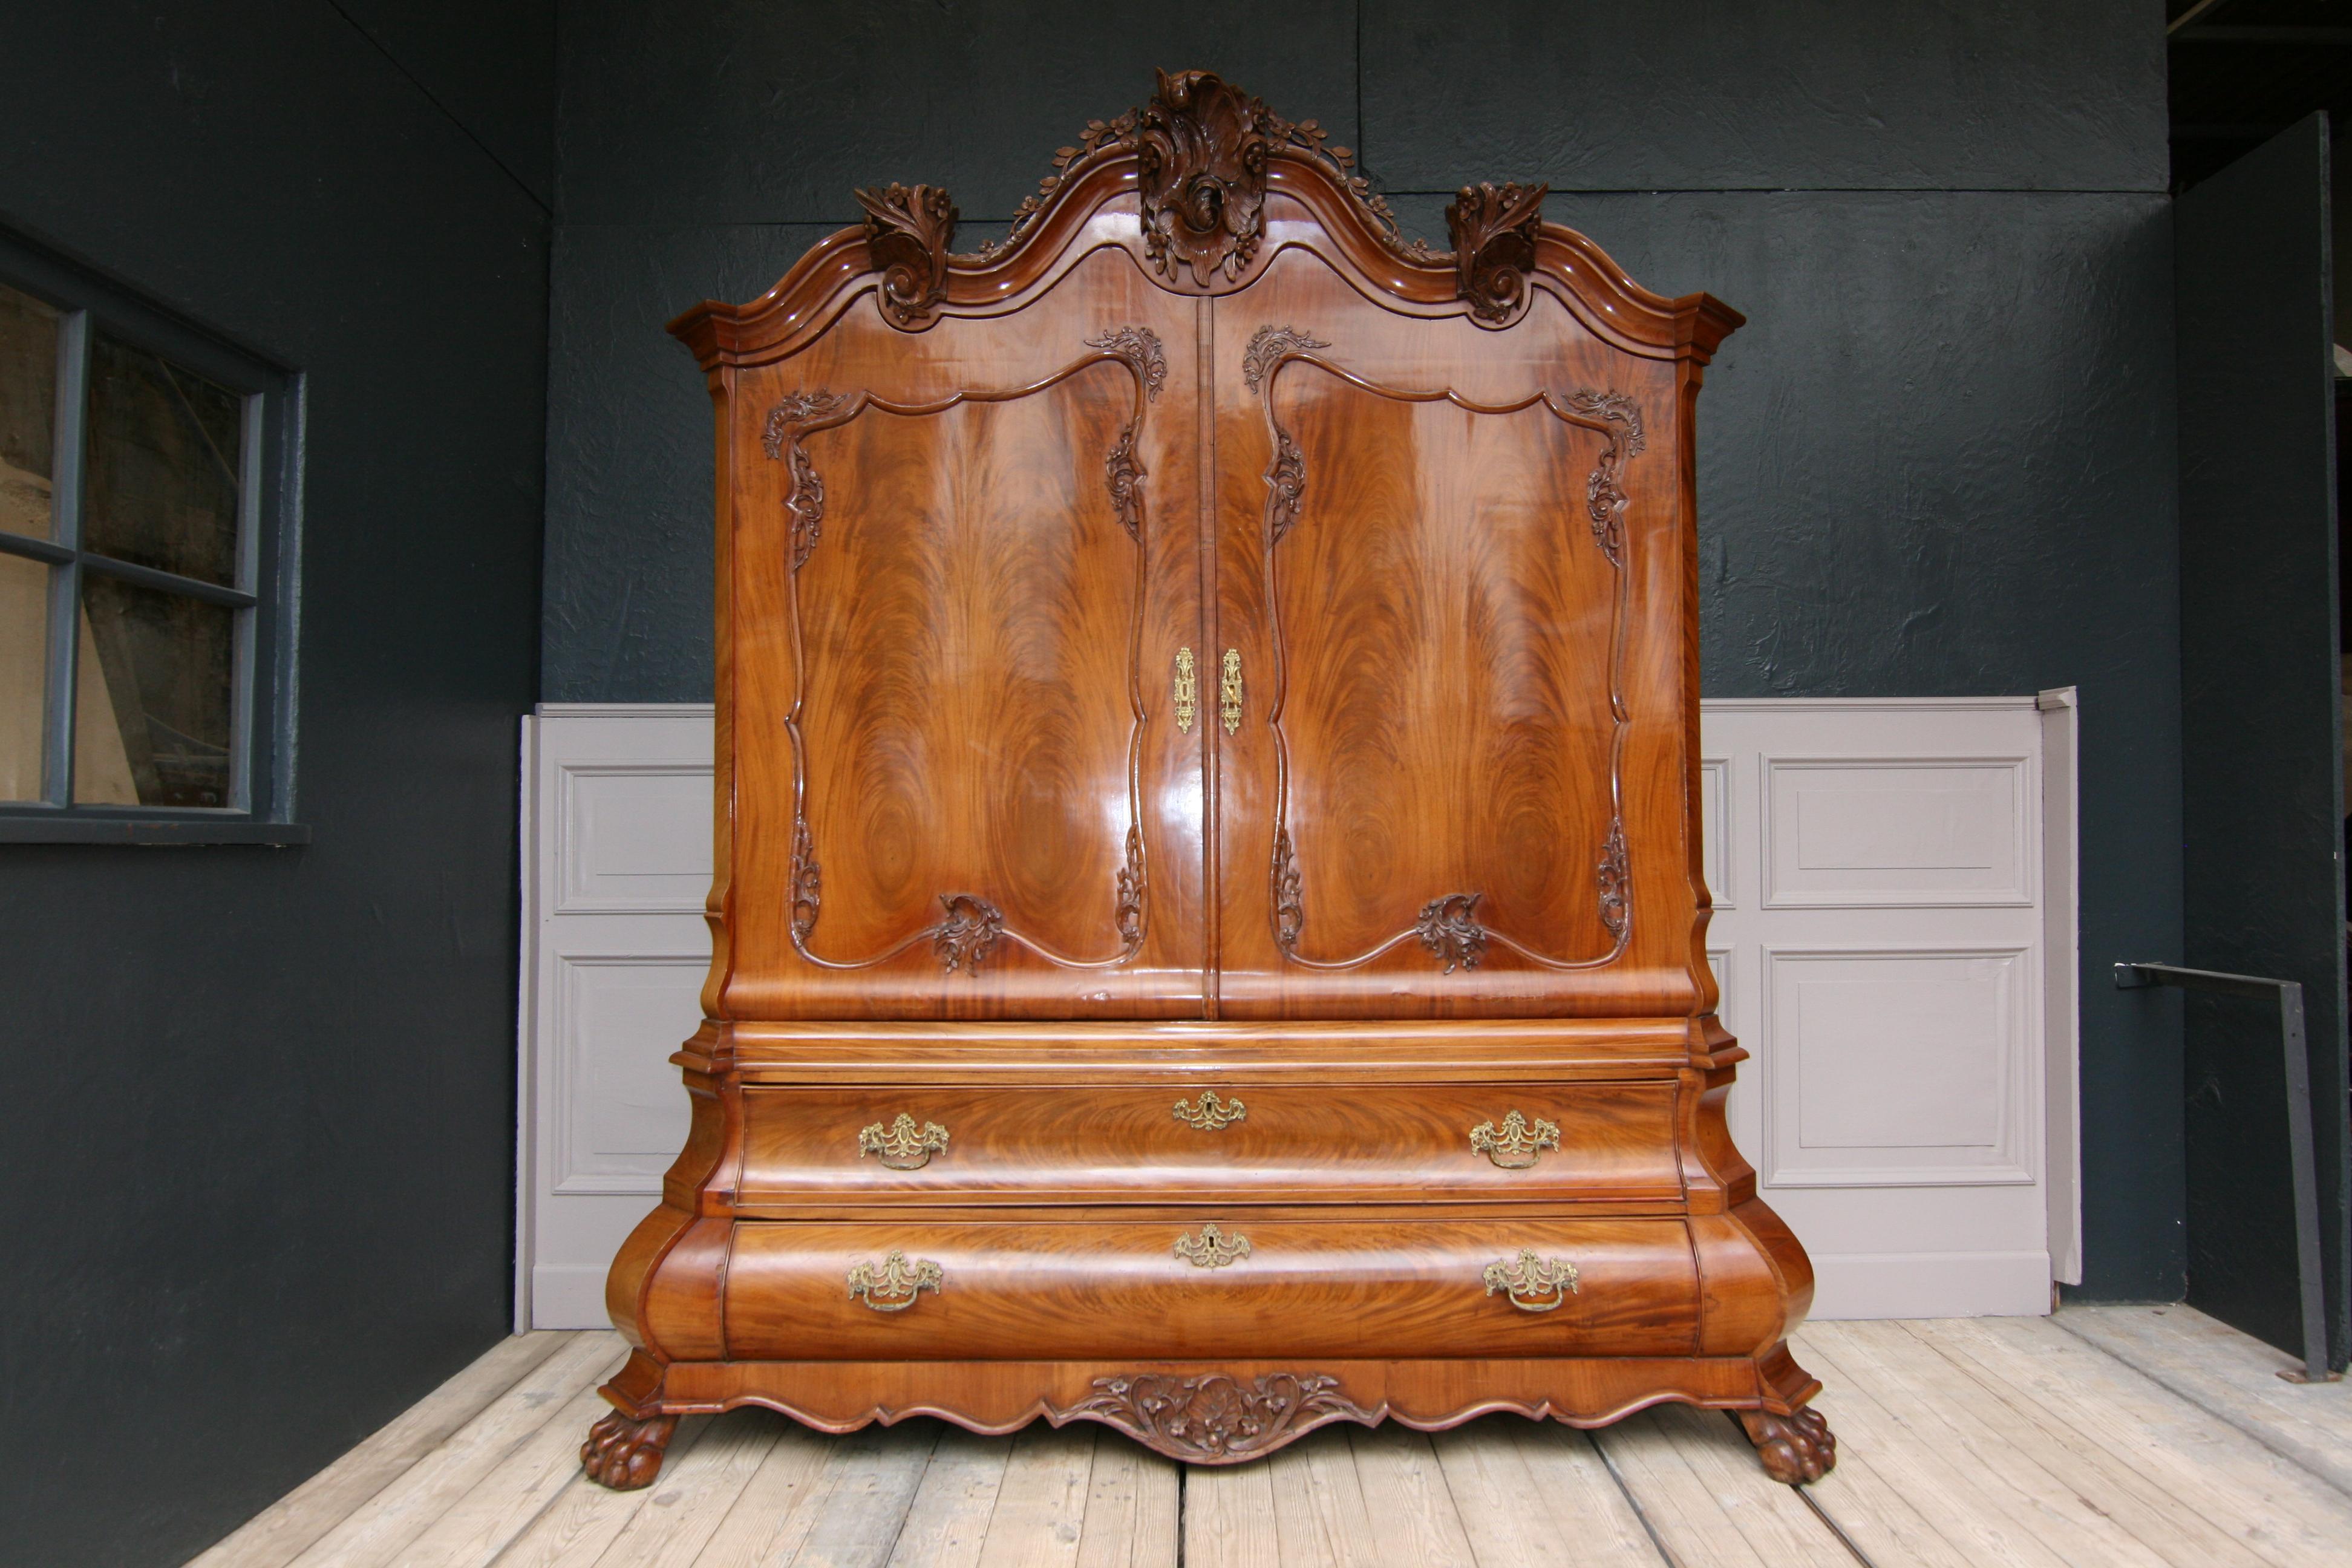 An 18th century Dutch baroque linen press or cabinet. Mahogany veneer on oak.
Bombay shaped chest of drawers standing on lion's paw feet with a strongly protruding lower and a retracted upper drawer. Laterally beveled corners that repeat the